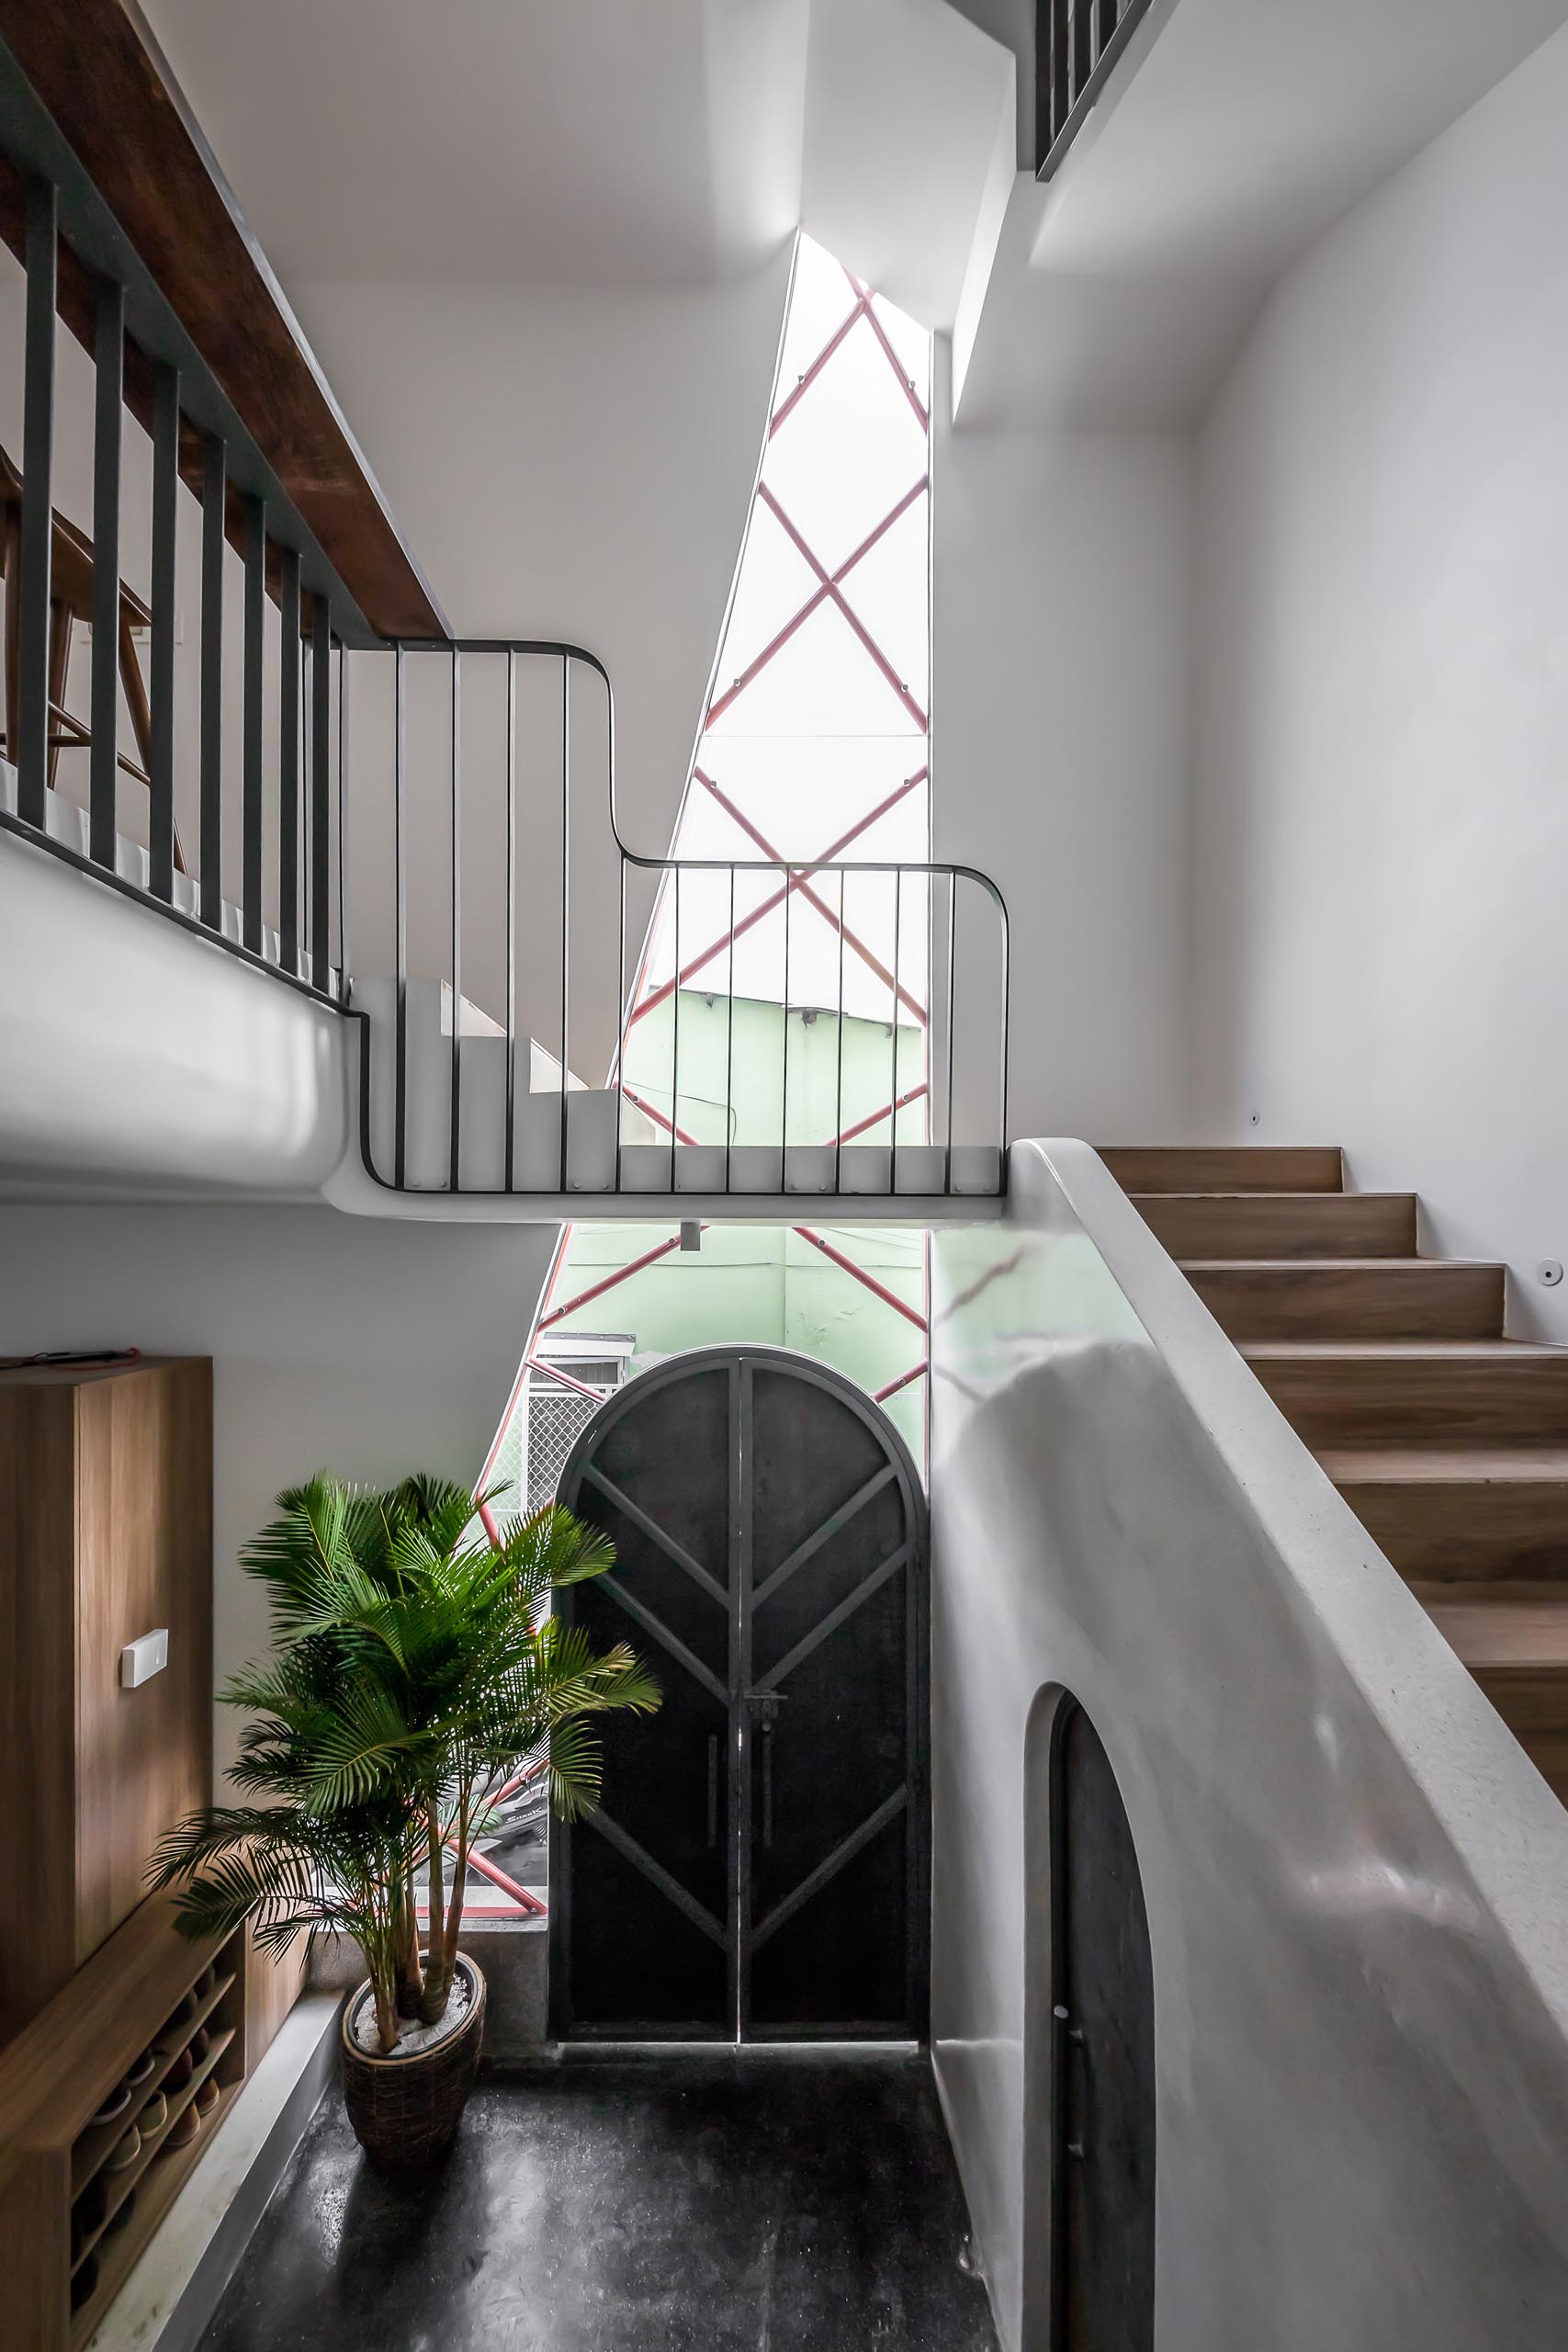 An irregular shaped window fills the entryway and staircase with natural light.